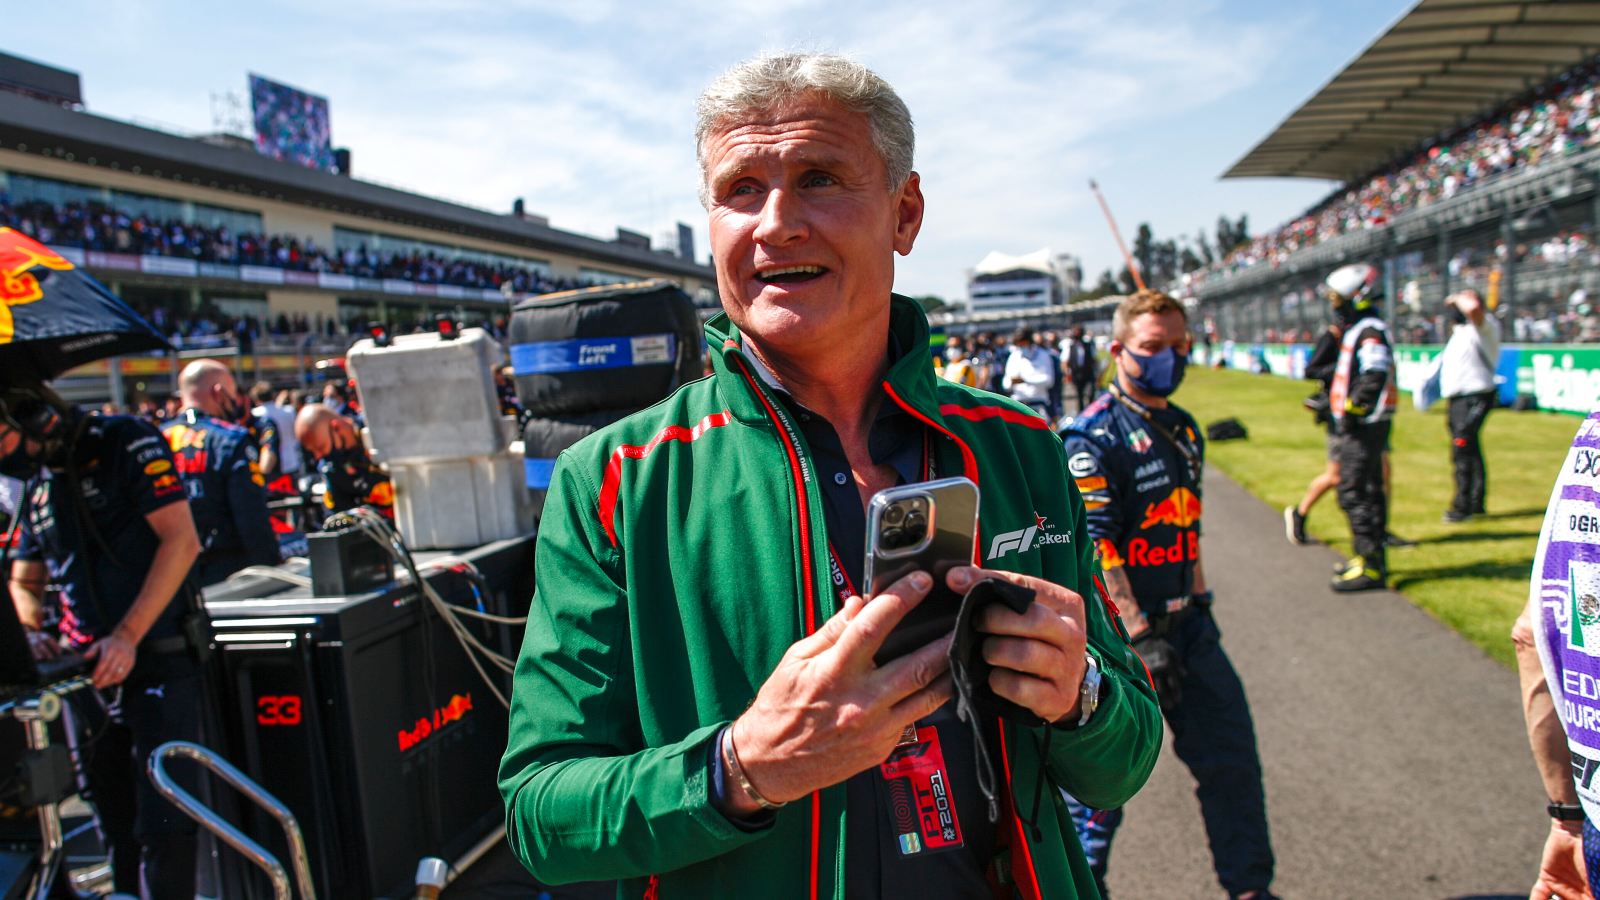 David Coulthard on the grid during the Mexican Grand Prix. Mexico, November 2021.